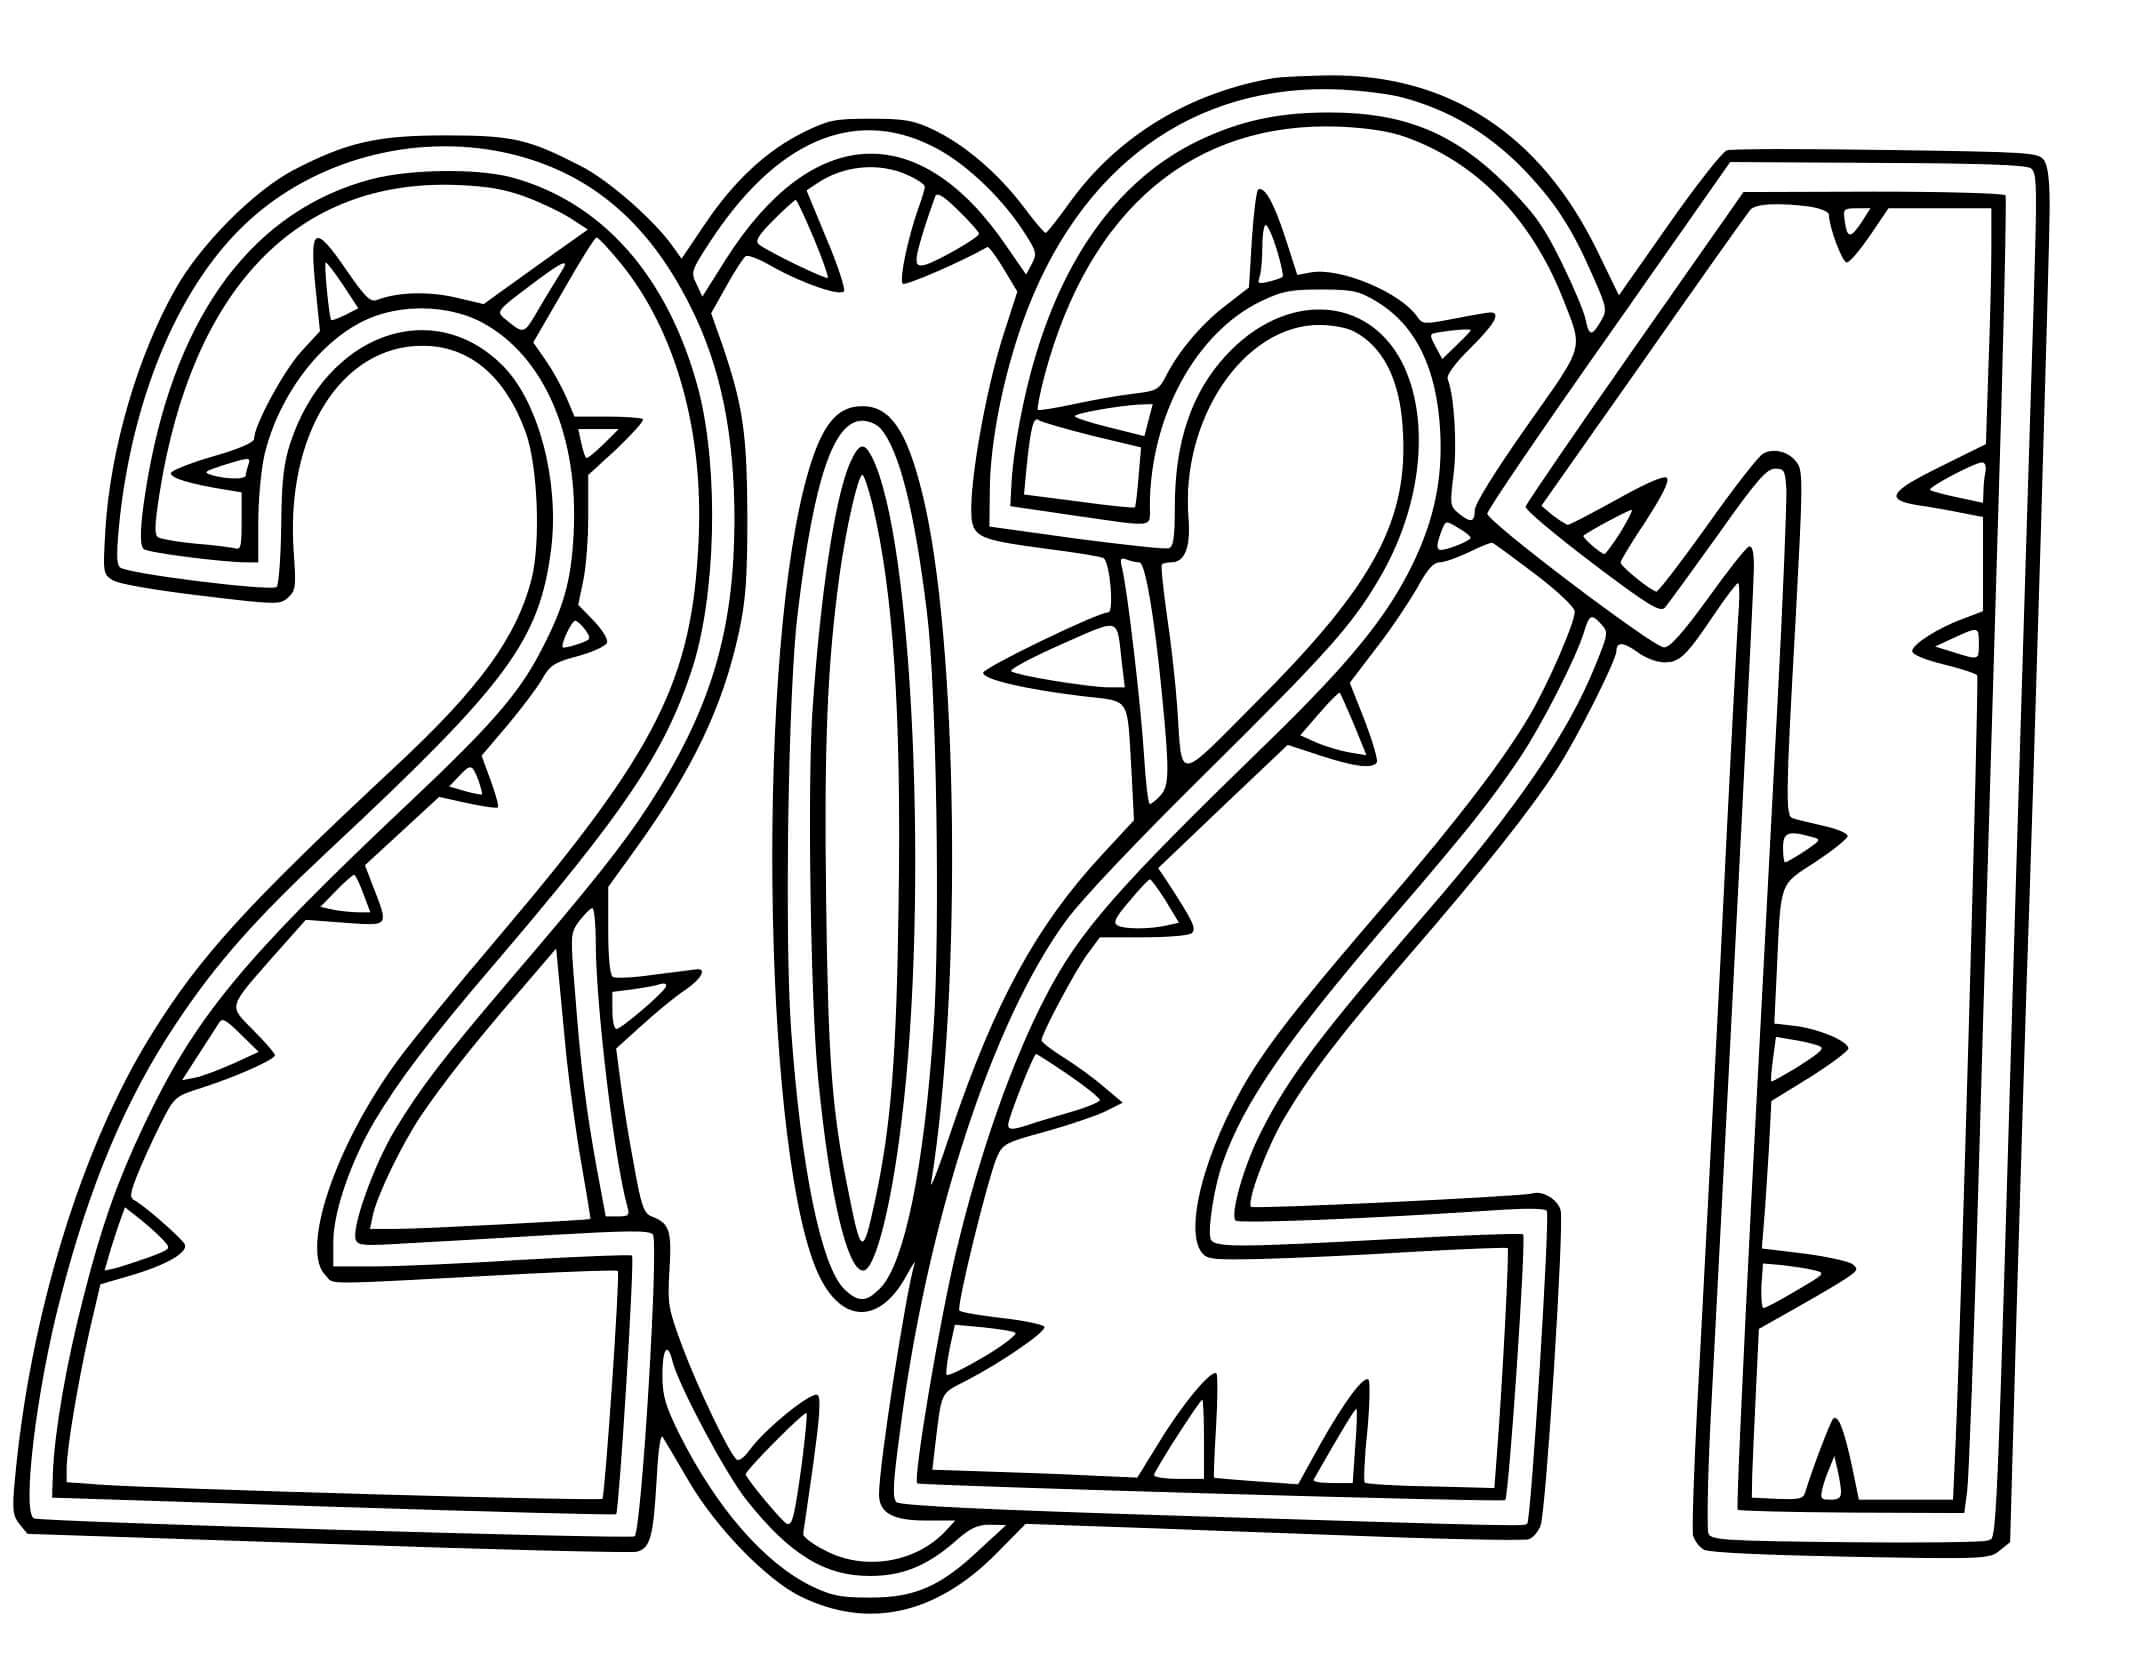 2021 Happy New Year Coloring Page